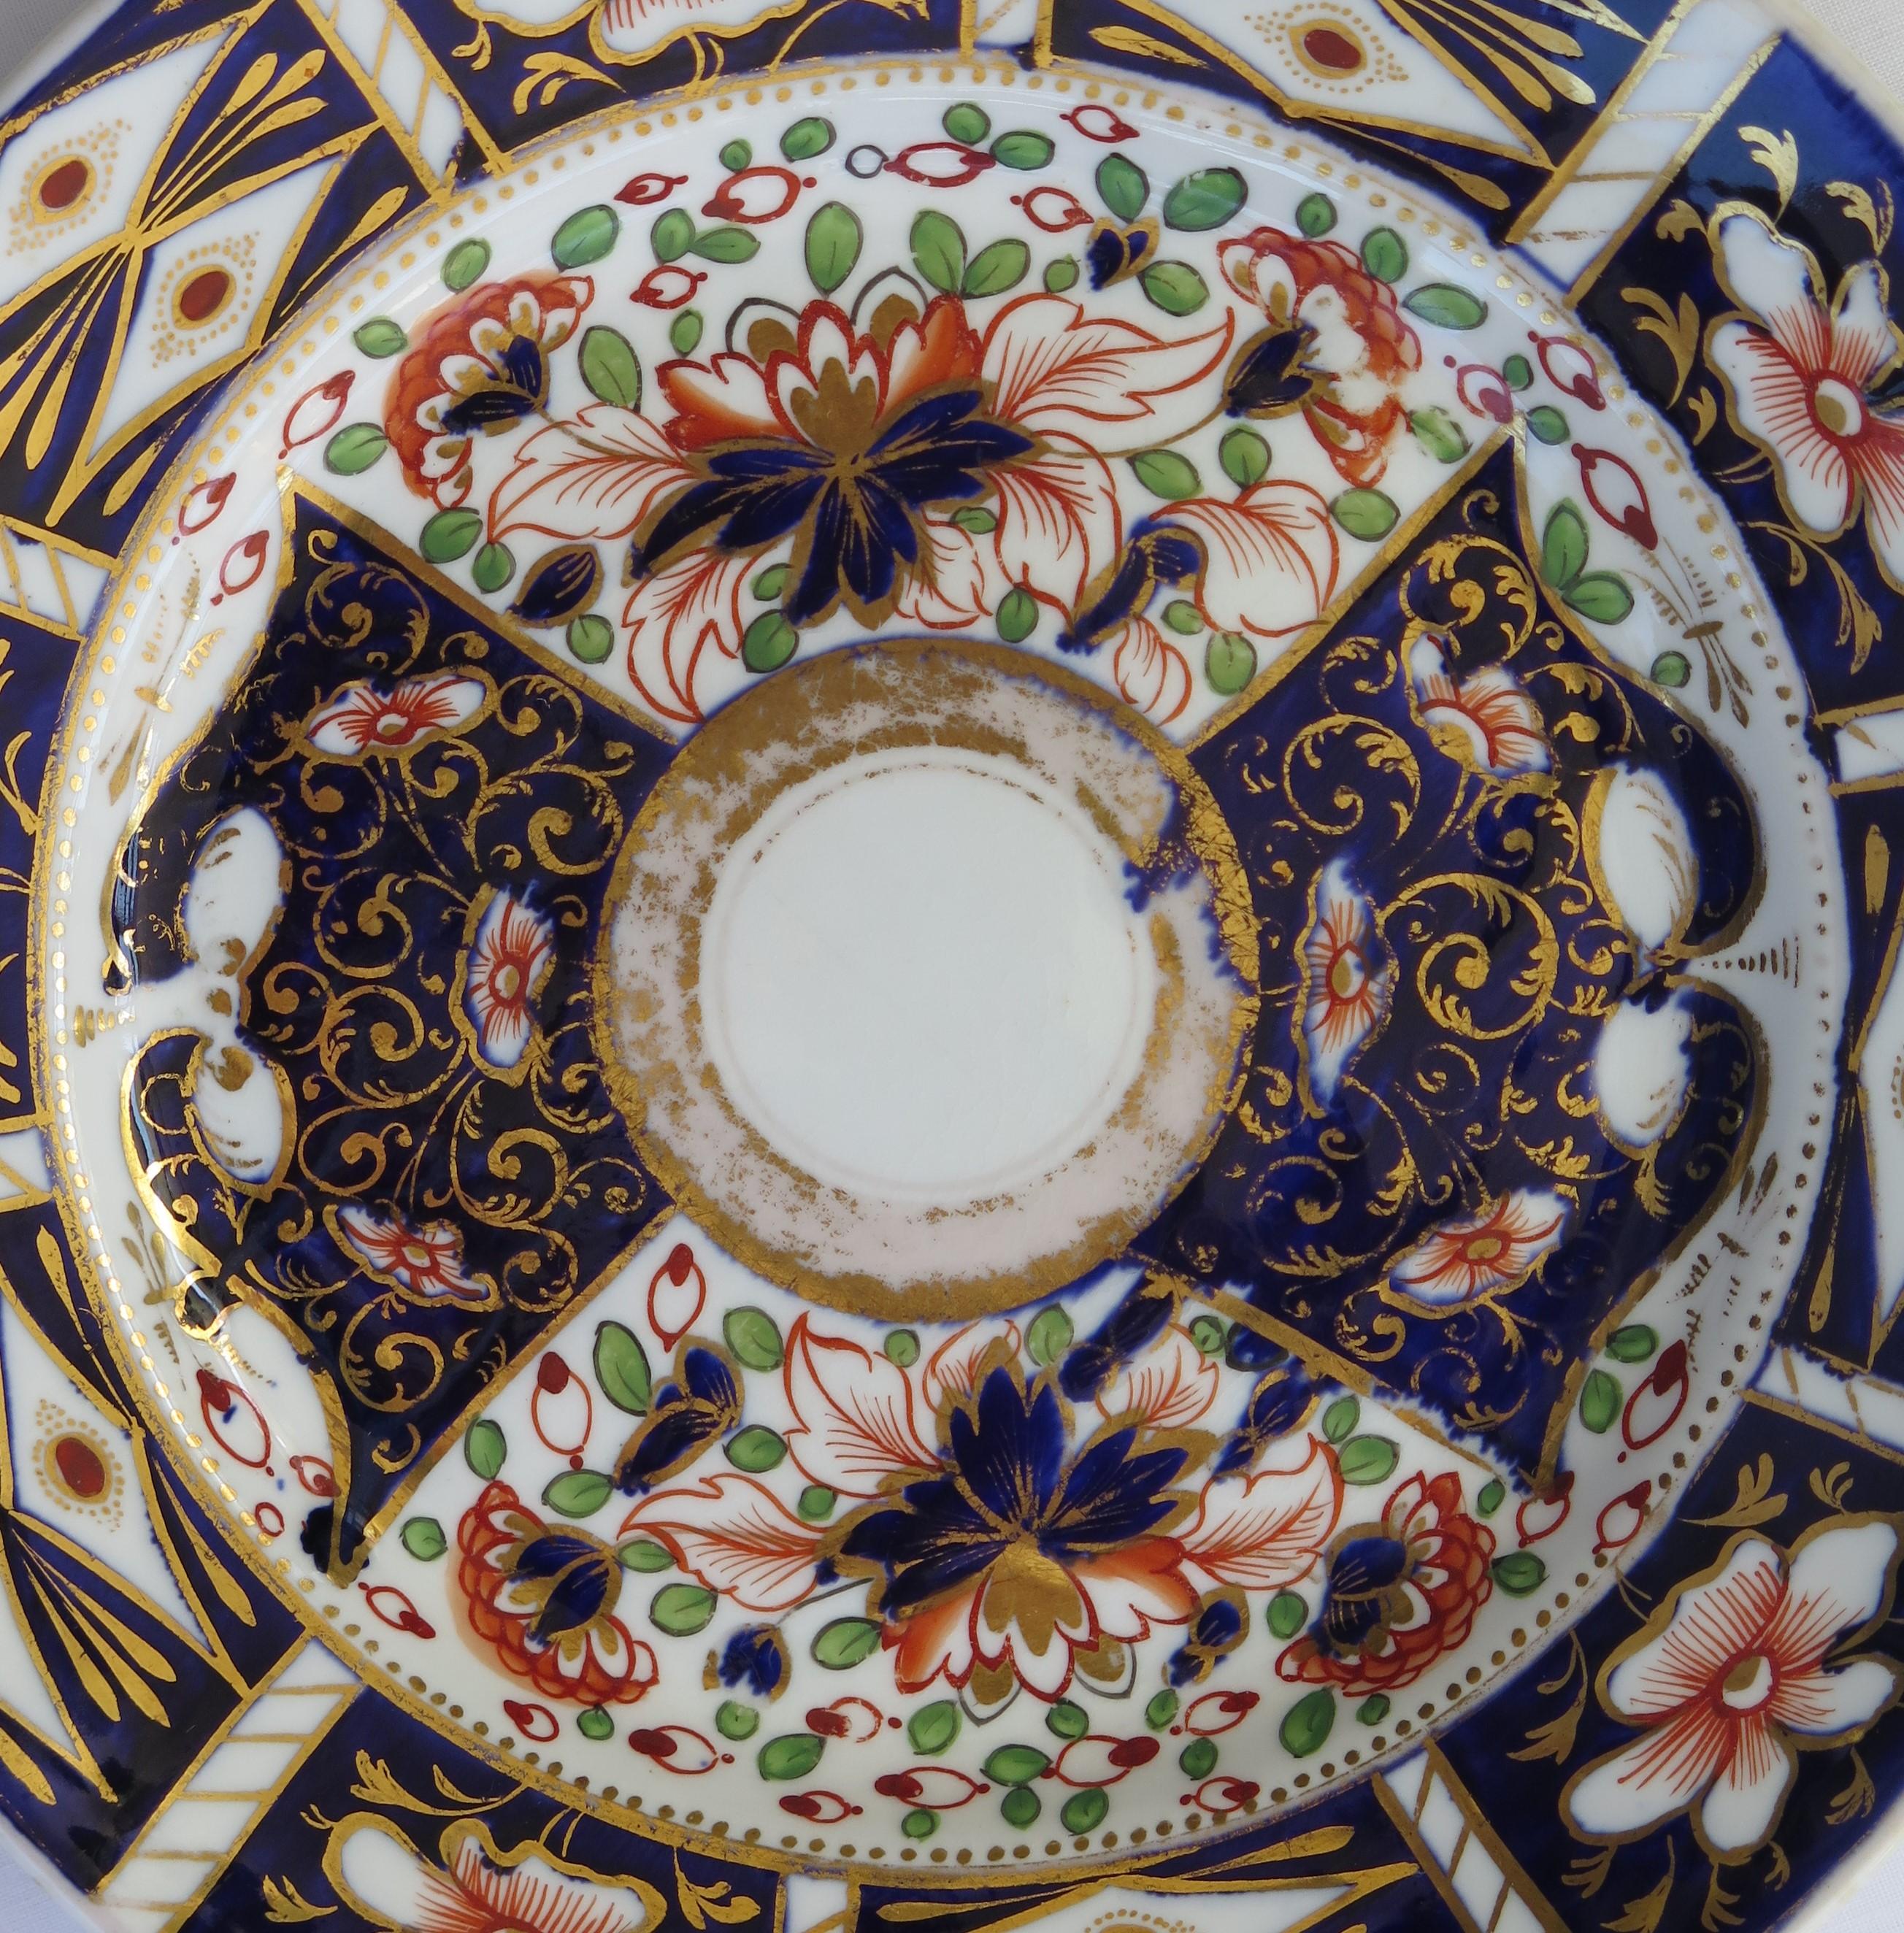 SIX Davenport Porcelain Plates Hand Painted and Gilded Pattern, Circa 1870 For Sale 11